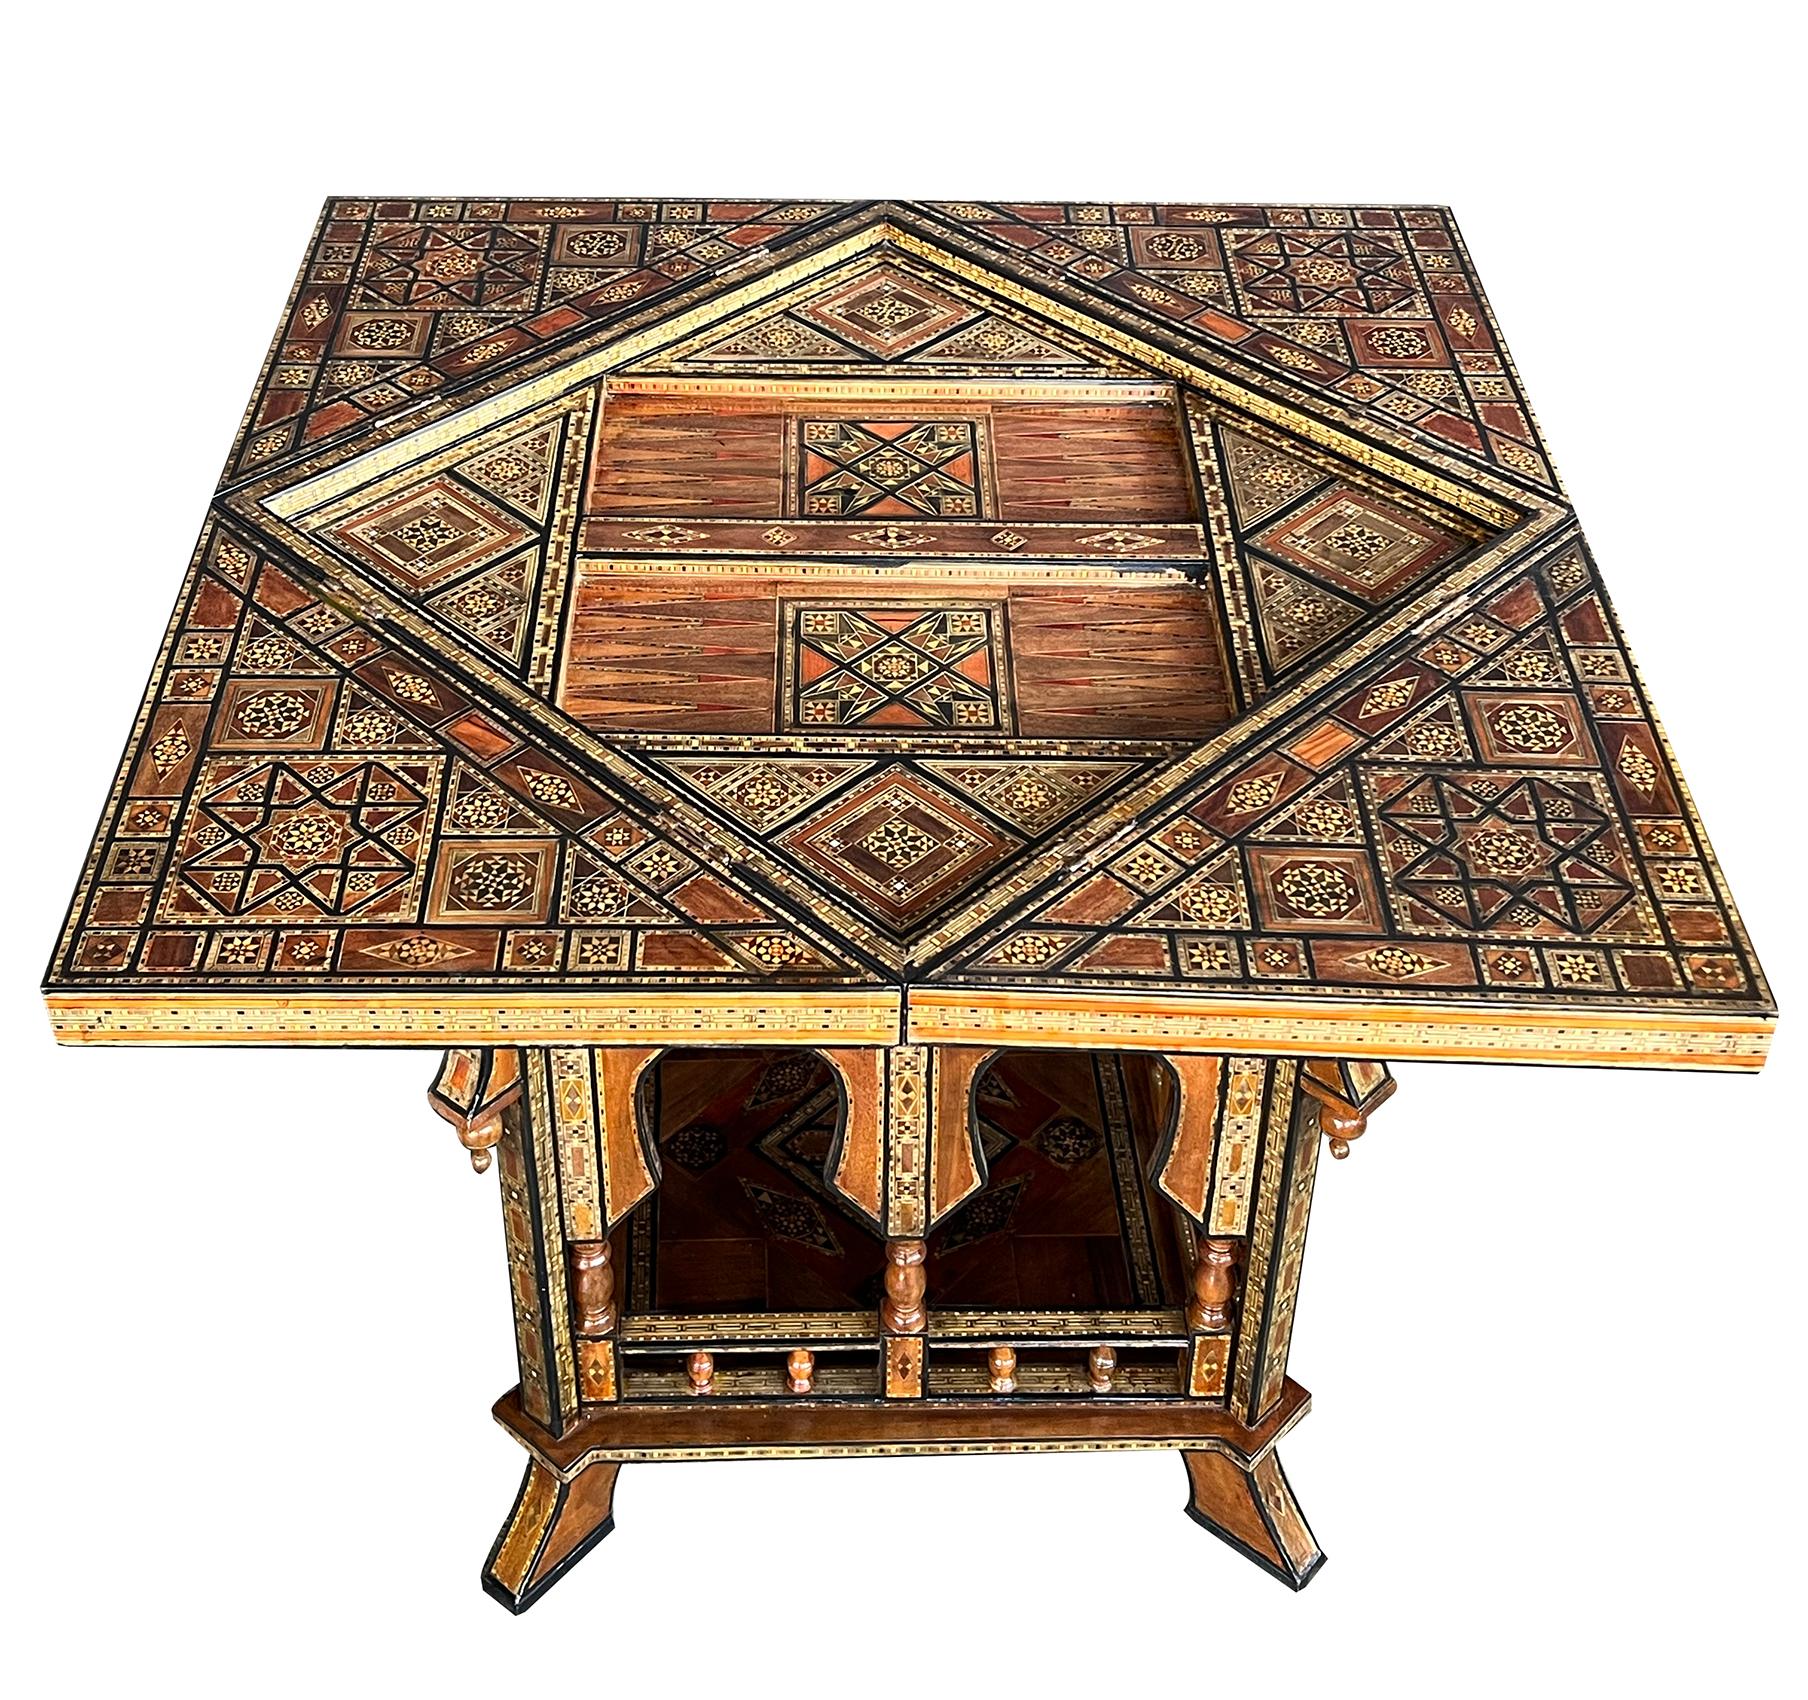 Moroccan Intricately Inlaid Moorish Square Game Table with Pivoting Handkerchief Top For Sale